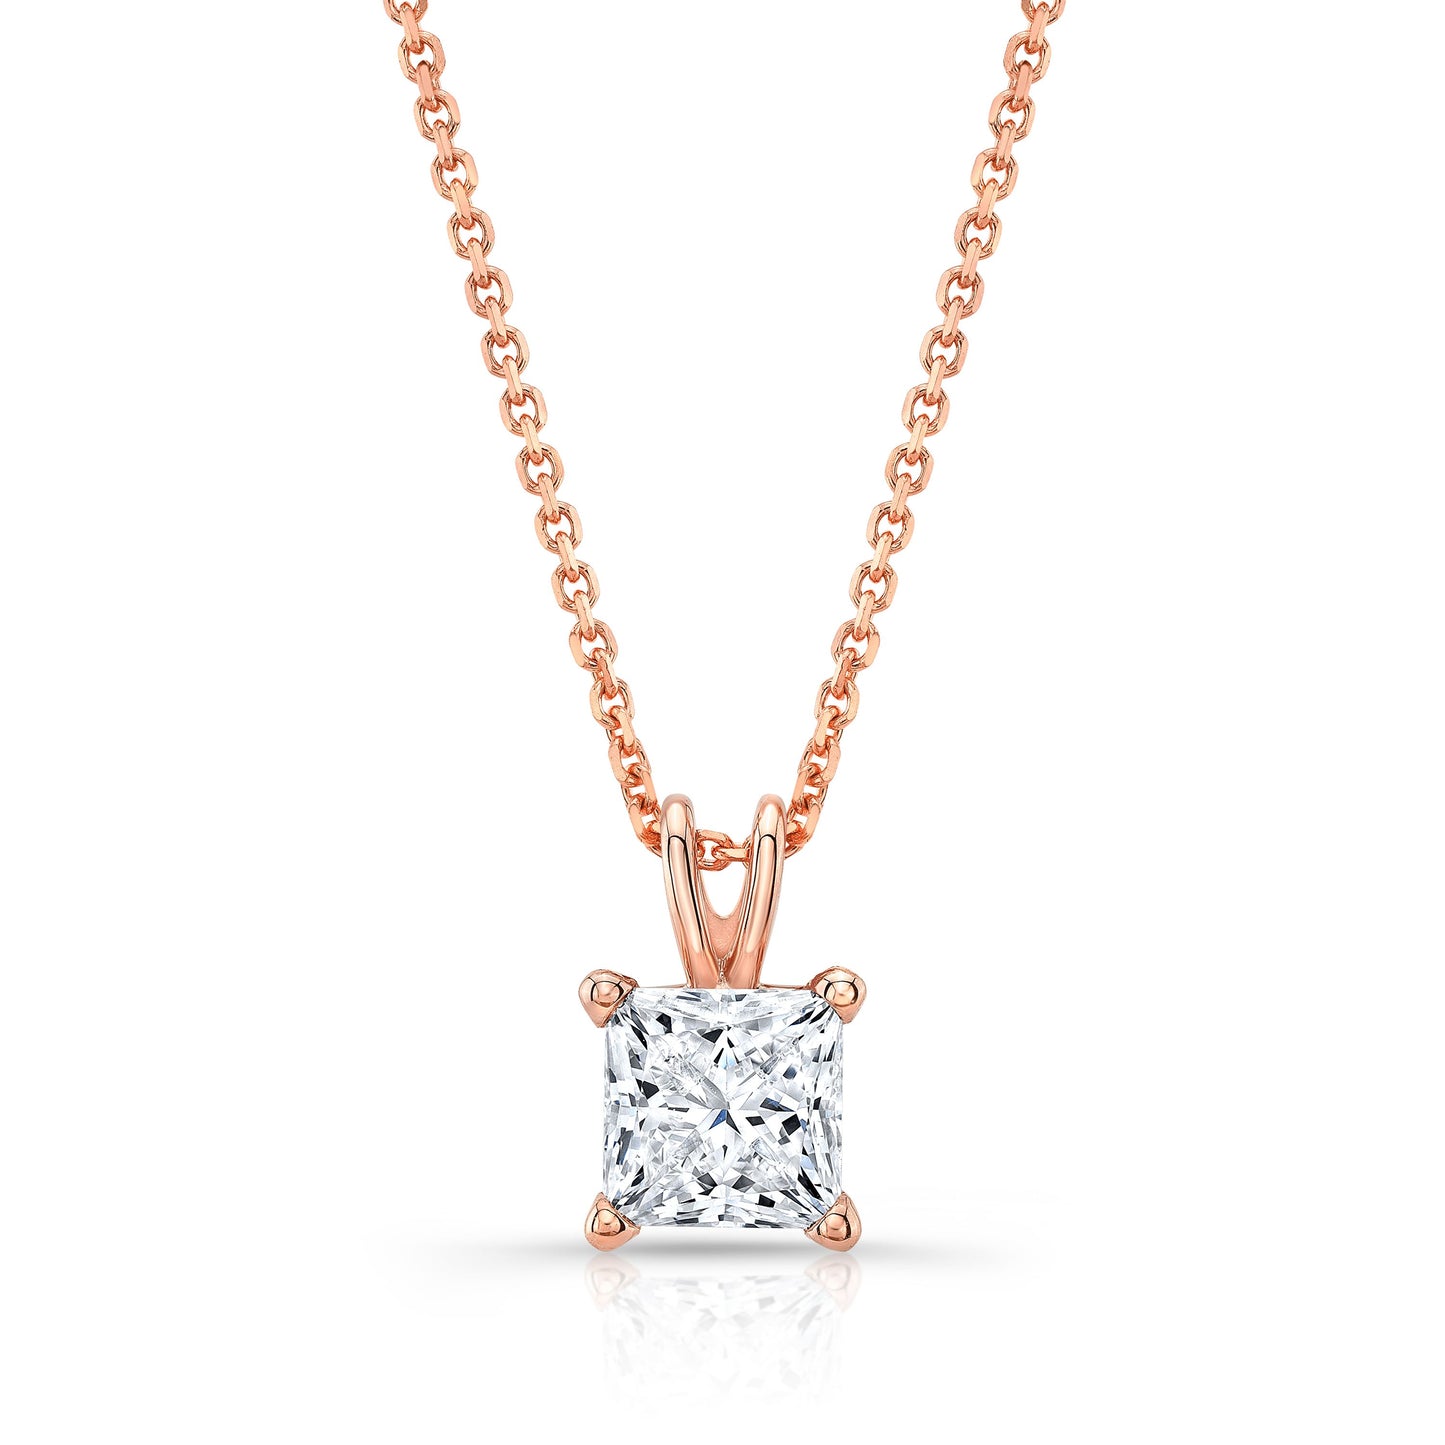 Princess Diamond Solitaire Pendant In A 14k Rose Gold 4-prong Basket Setting, 2ct. T.w. (hi, Si1-si2)